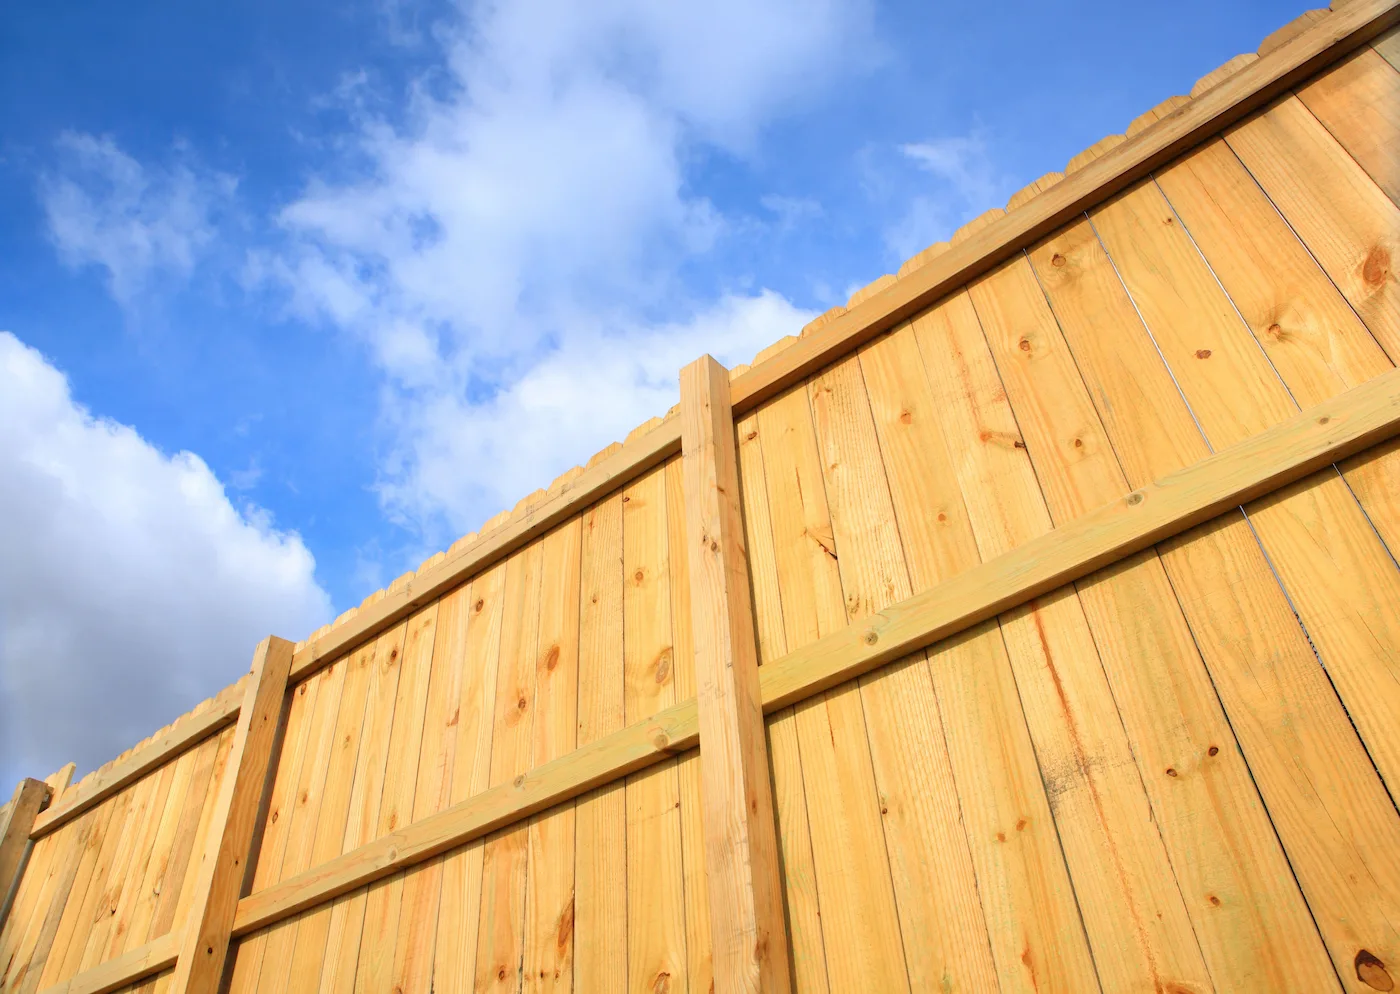 Image of a fence